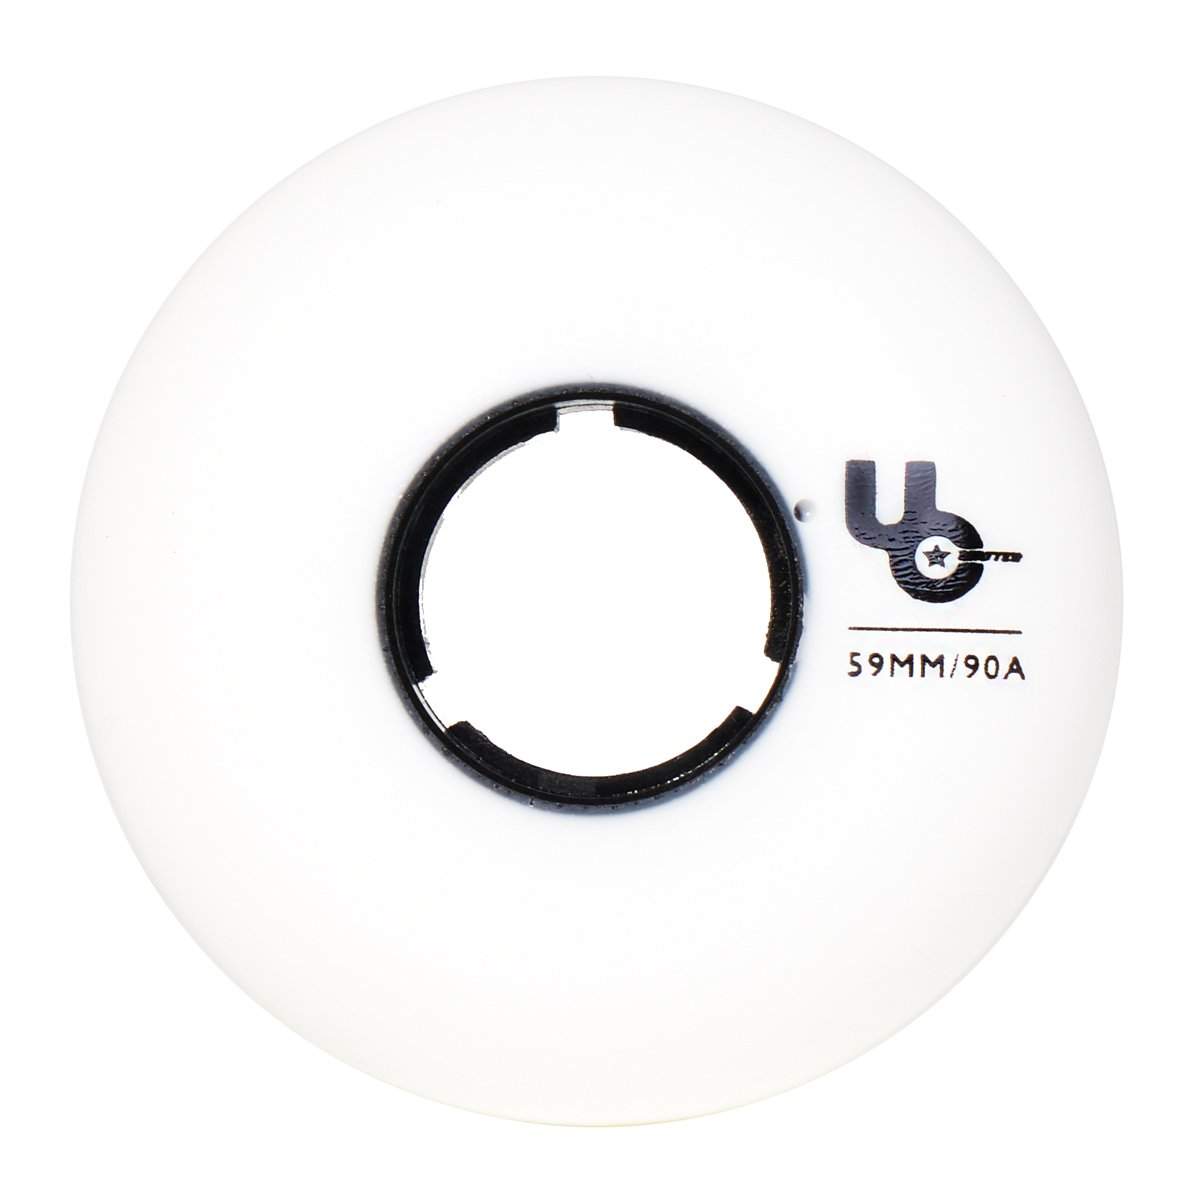 Undercover Team Wheels 59mm / 90a - White